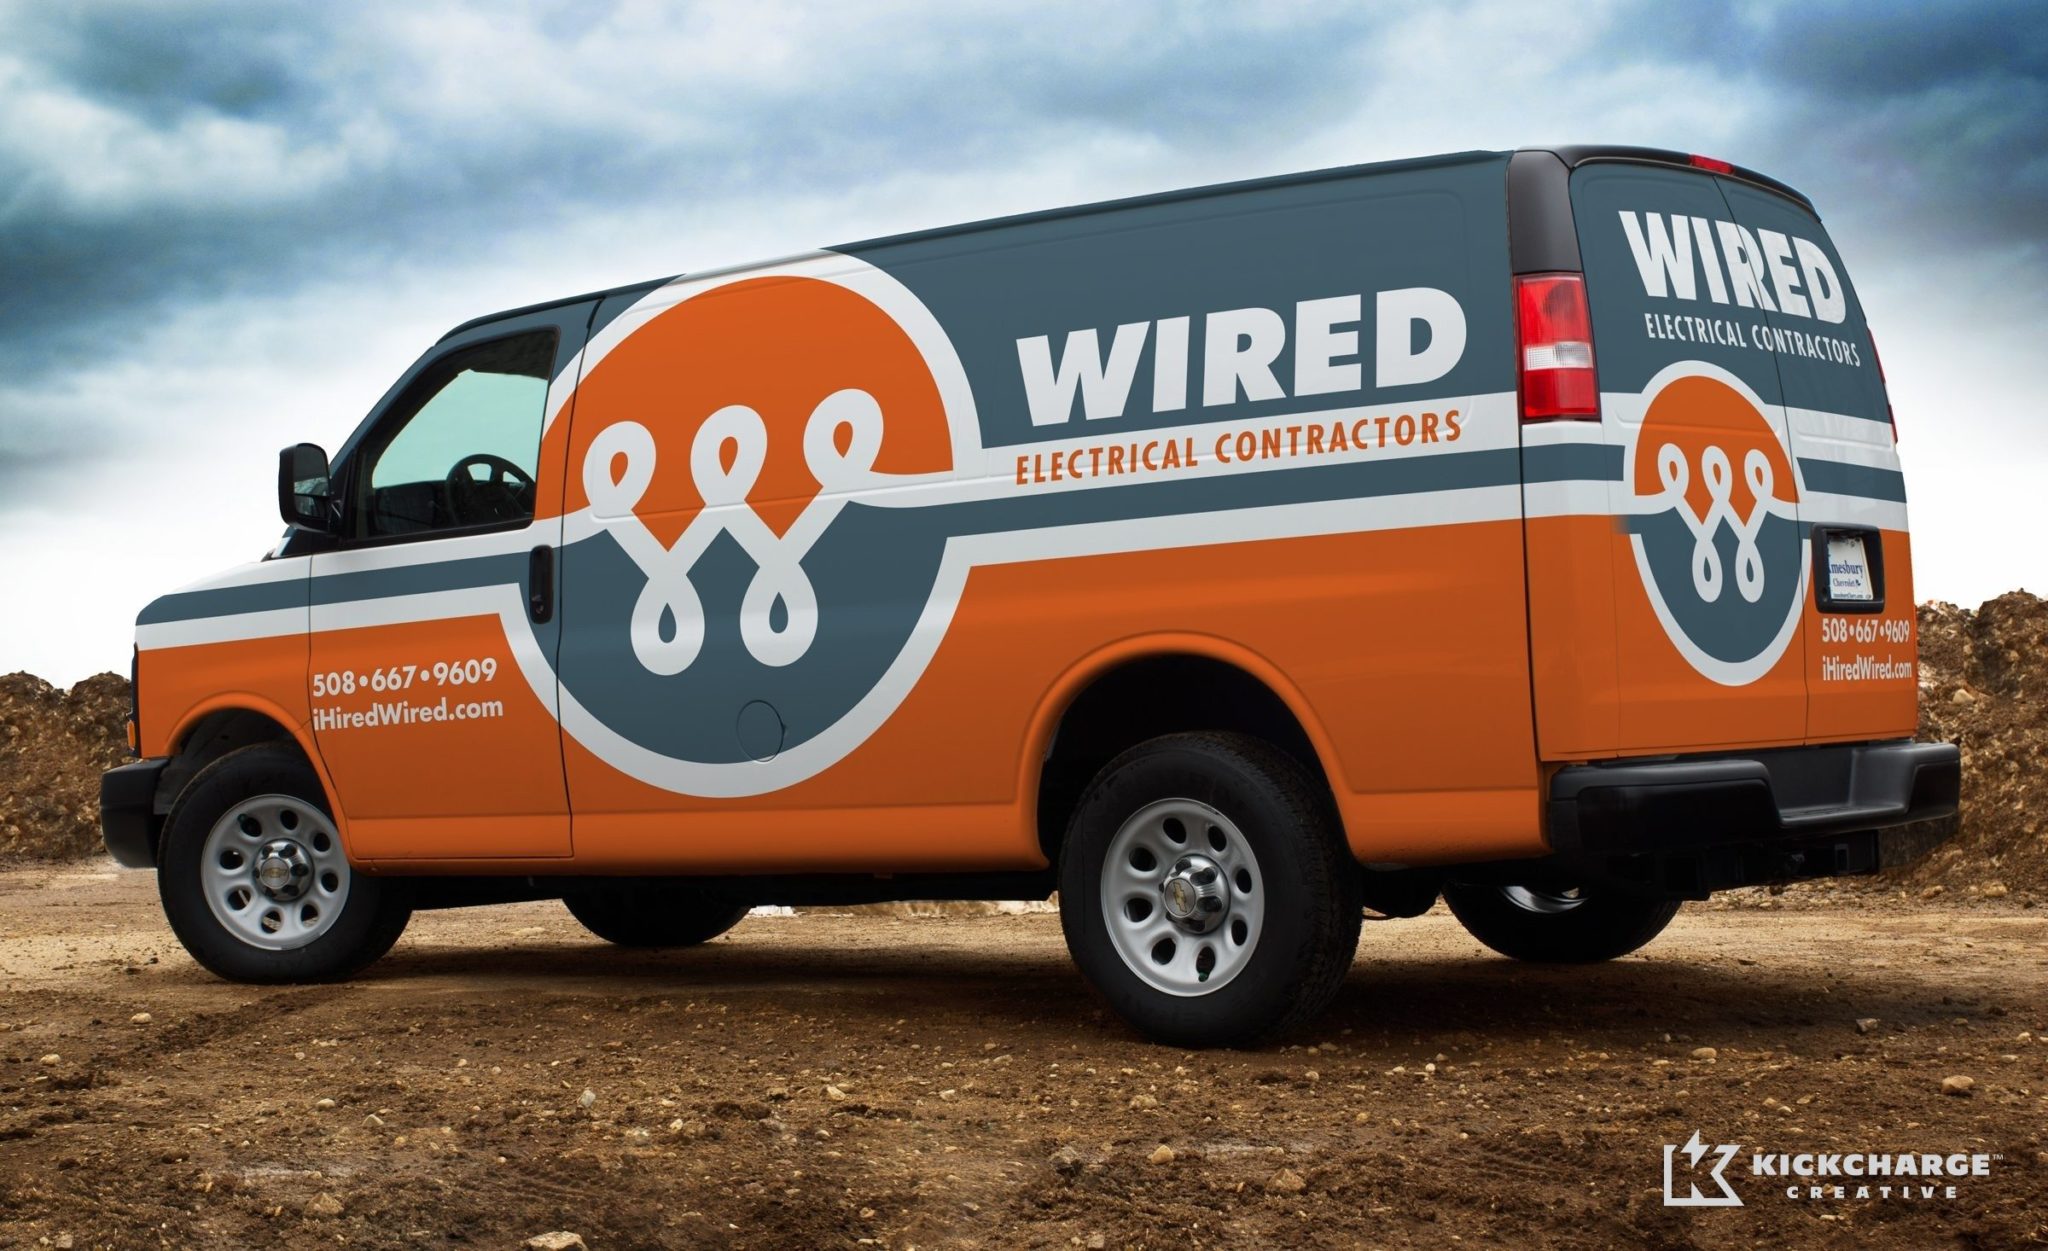 Vehicle wrap design and corporate identity for an electrician in MA.